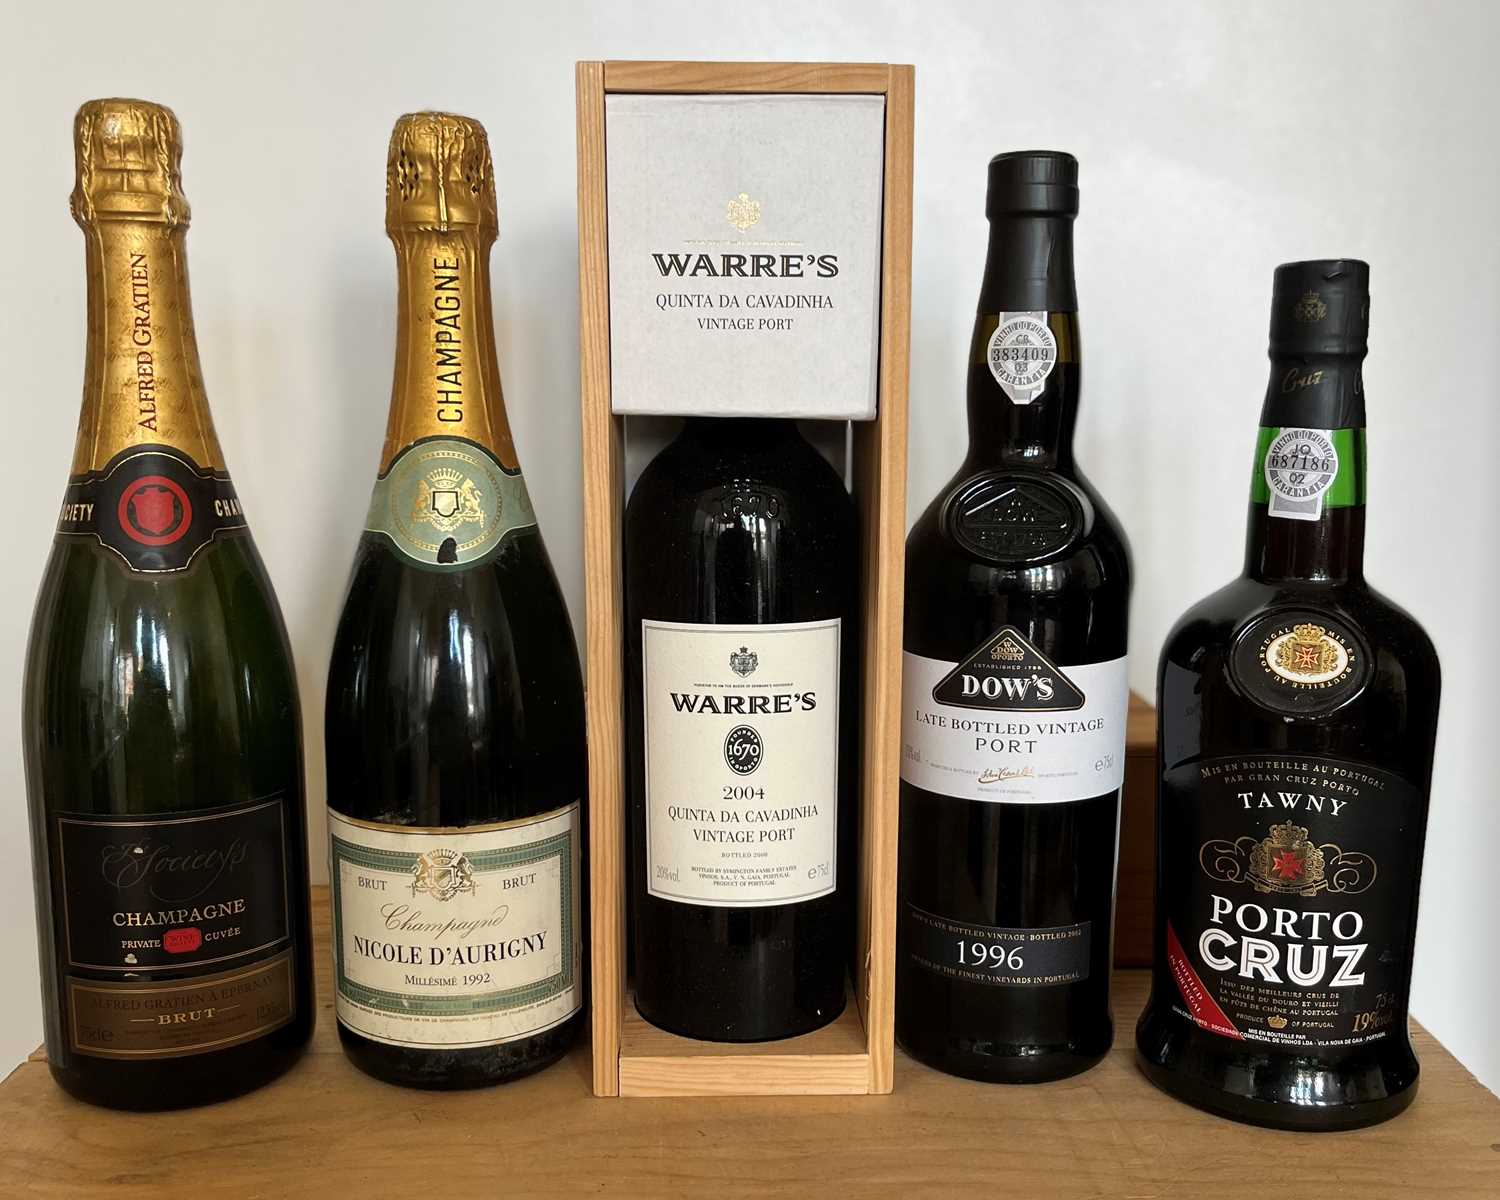 Lot 25 - 5 Bottles Mixed Lot Champagne and Port